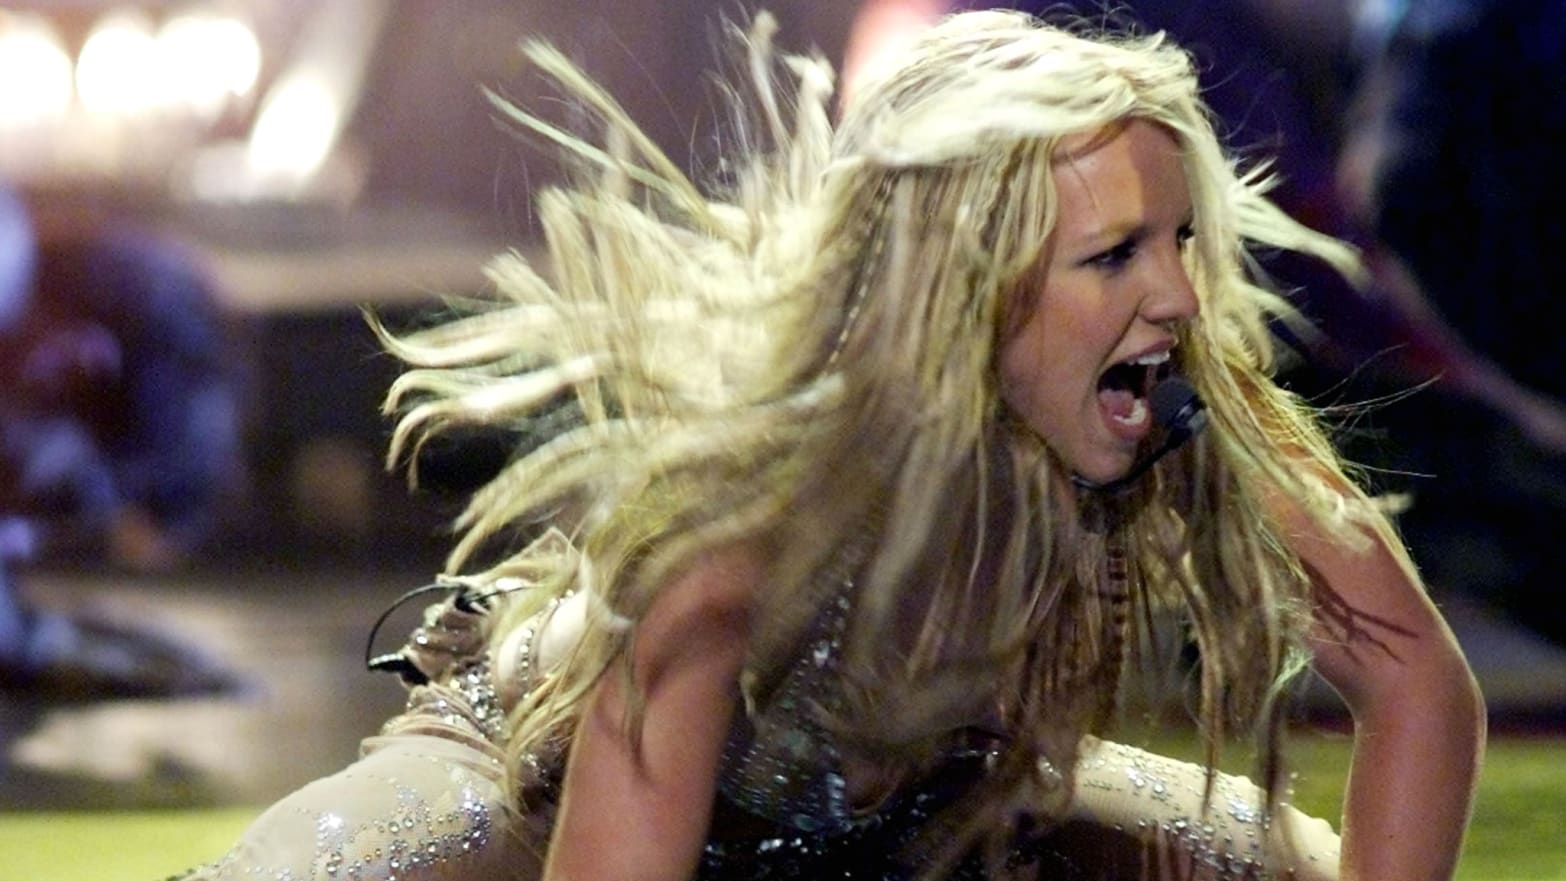 Britney Spears performs at the MTV Video Music Awards in New York on Sept. 7, 2000.